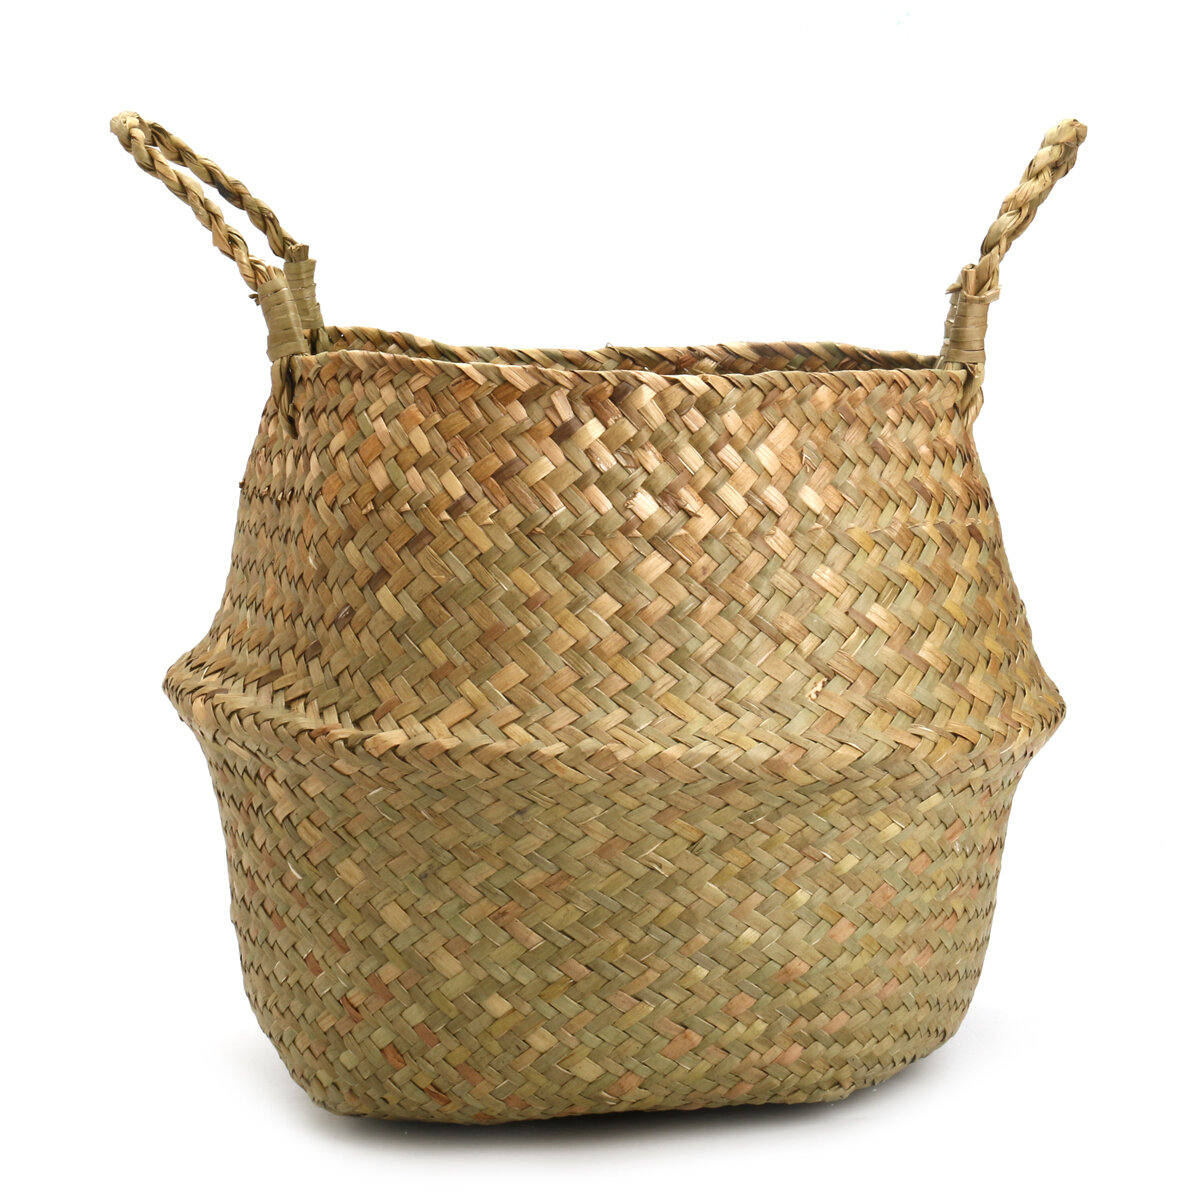 Seagrass Belly Basket 27x24 Handmade Storage Plant Pot Foldable Nursery Laundry Bag For Home Room Of